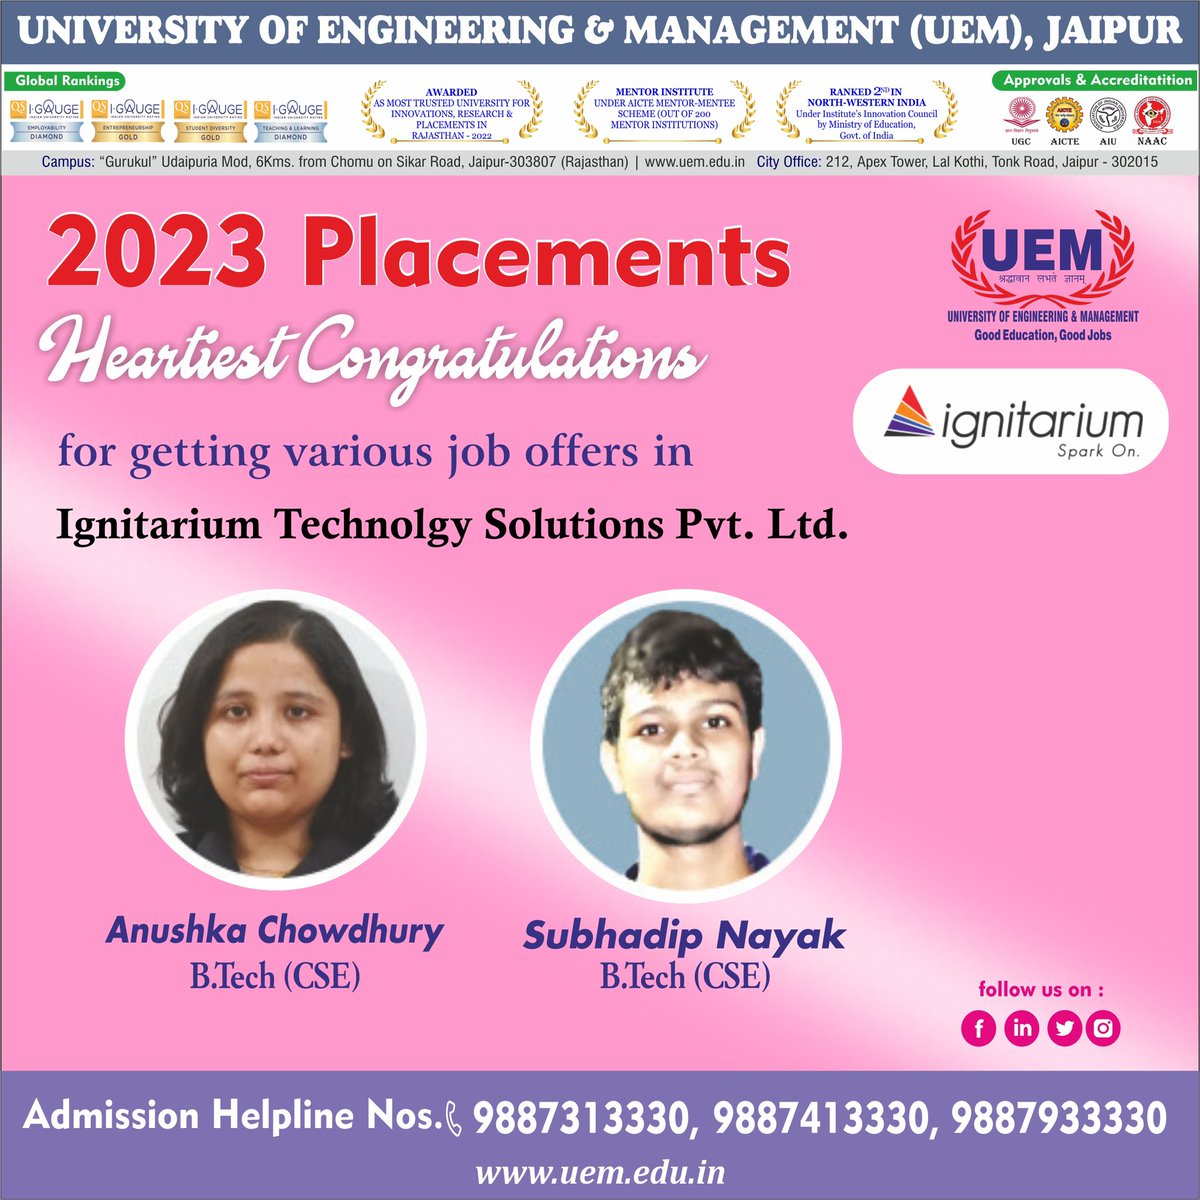 Heartiest Congratulations Anushka Chowdhury-BTech (CSE) , Subhadip Nayak- BTech (CSE), students of the University of Engineering & Management (UEM), JAIPUR for having acquired job offer in Ignitarium Technology Solutions Pvt. Ltd.

Admission link: bit.ly/3GBh61k

#UEM